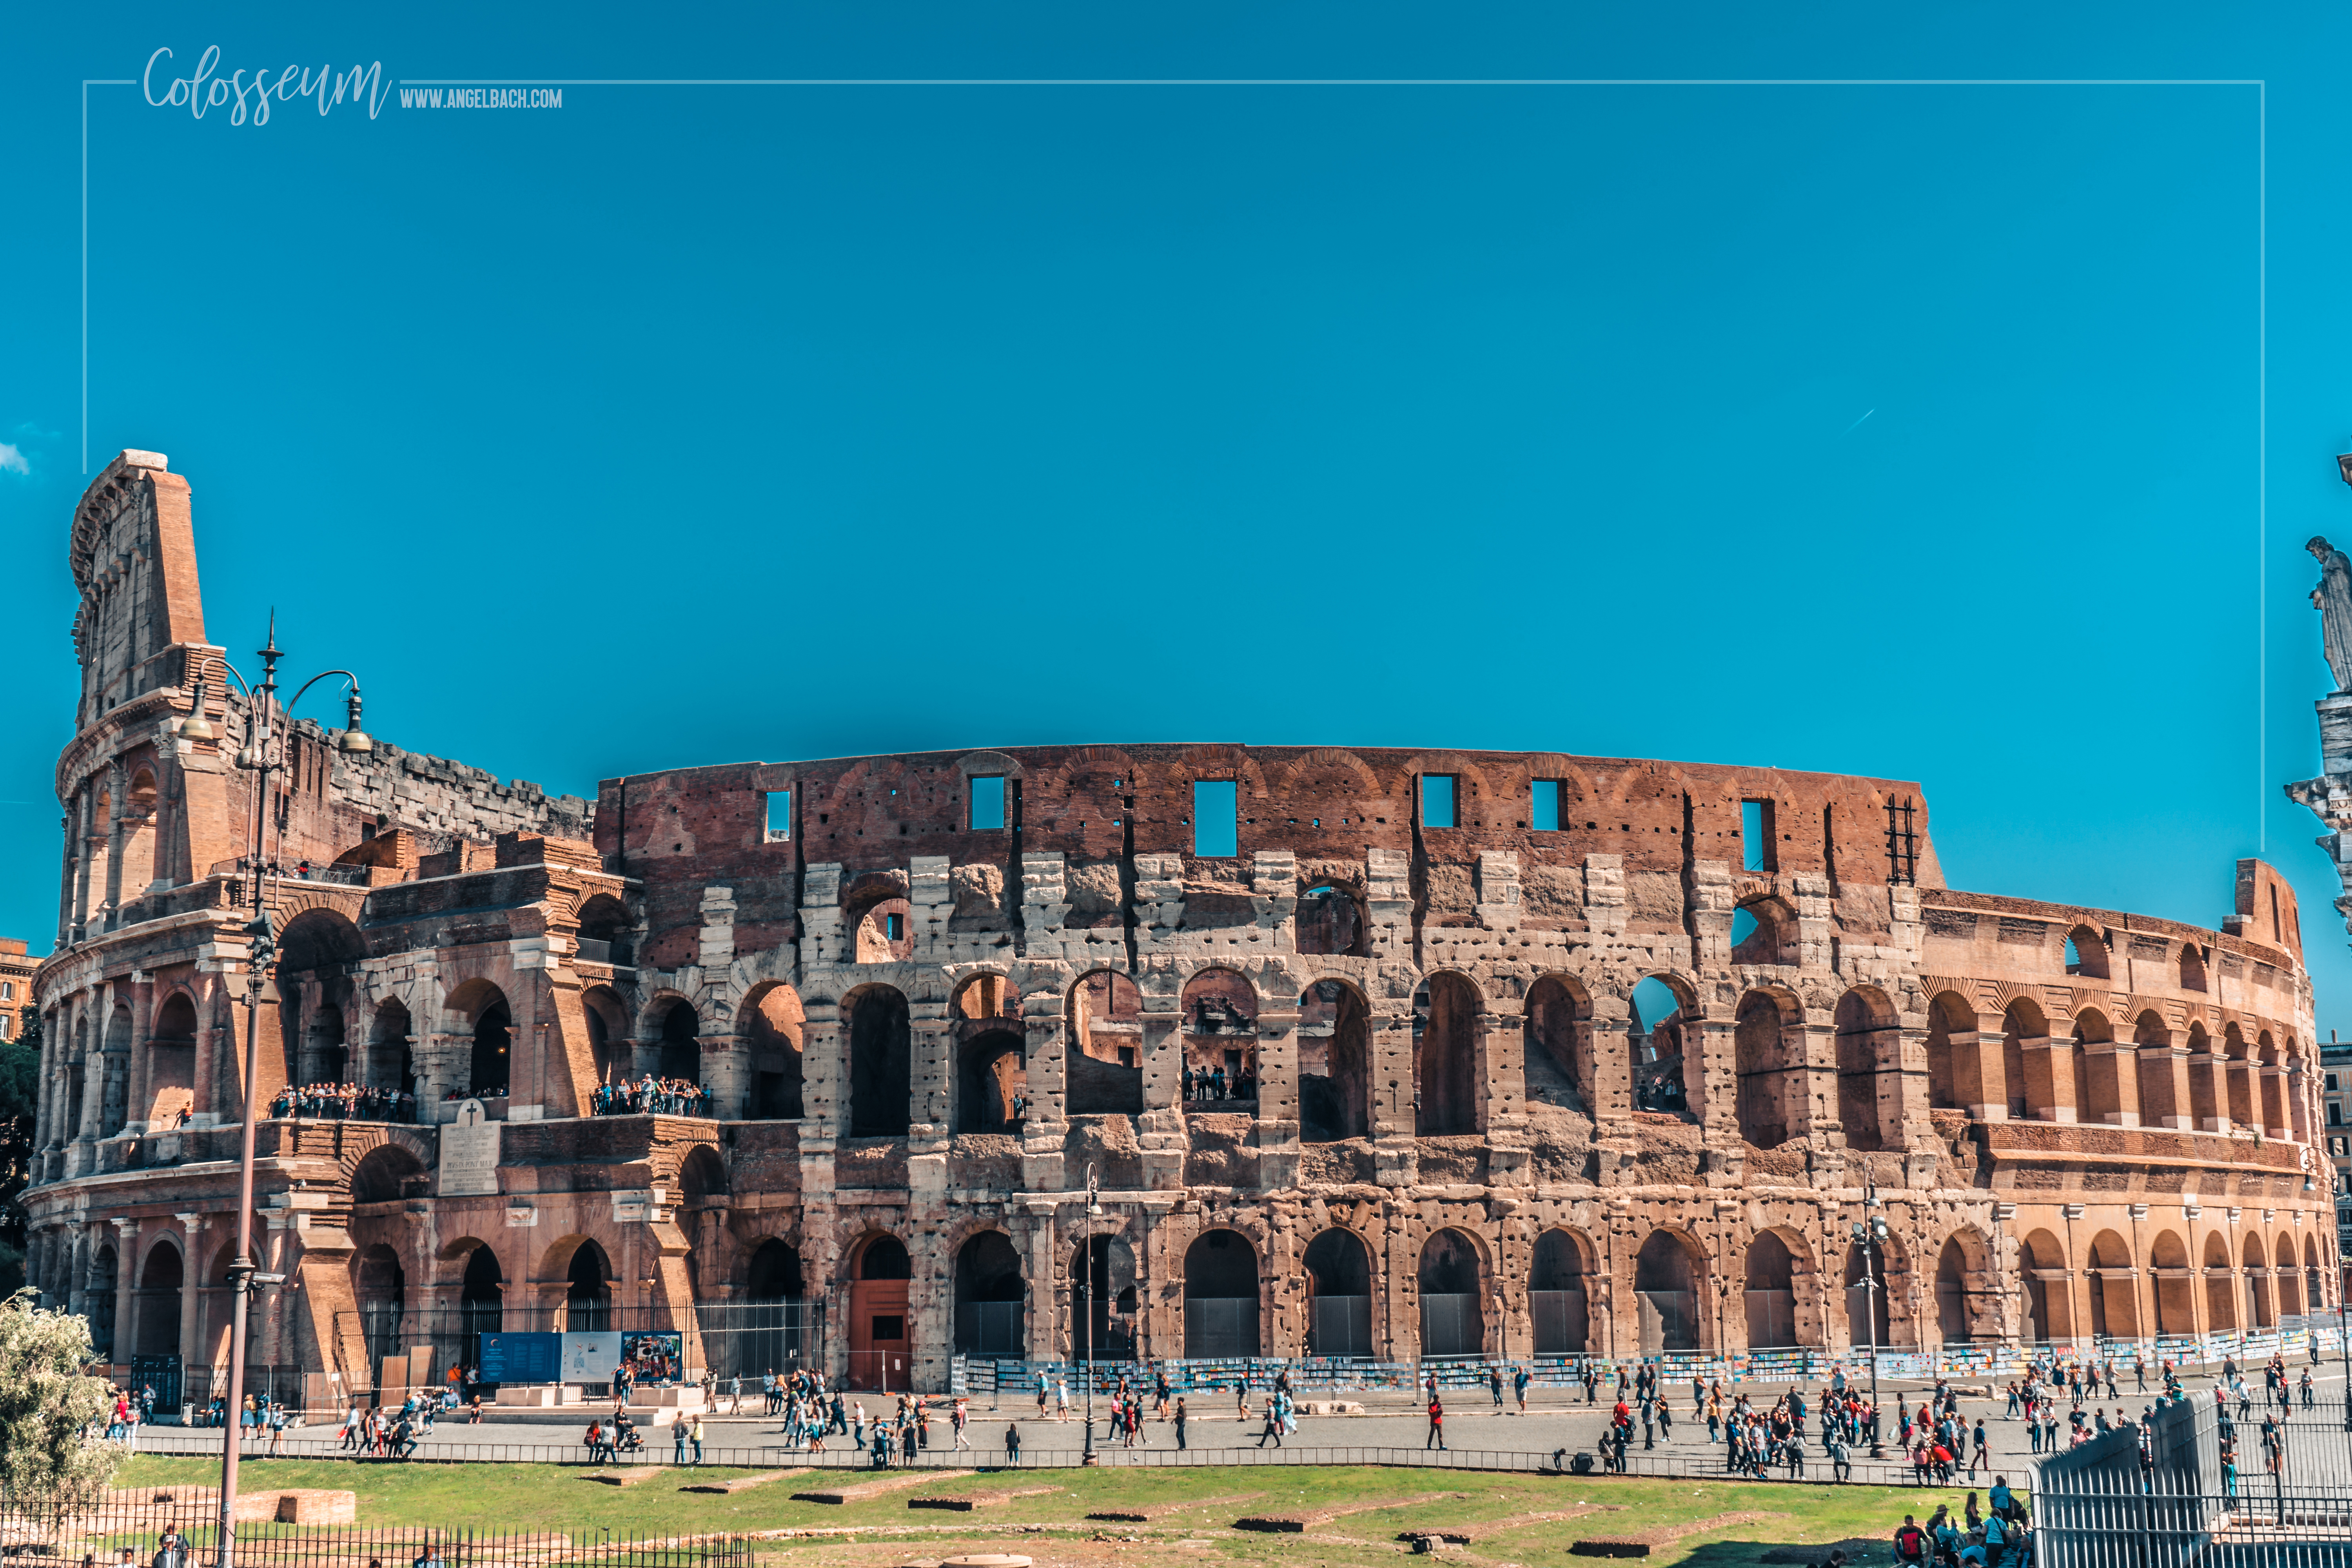 Rome, Cityscape, Leading lines, Street photography, Architecture Photography, Ancient Rome, Colosseum, Gladiators Combat